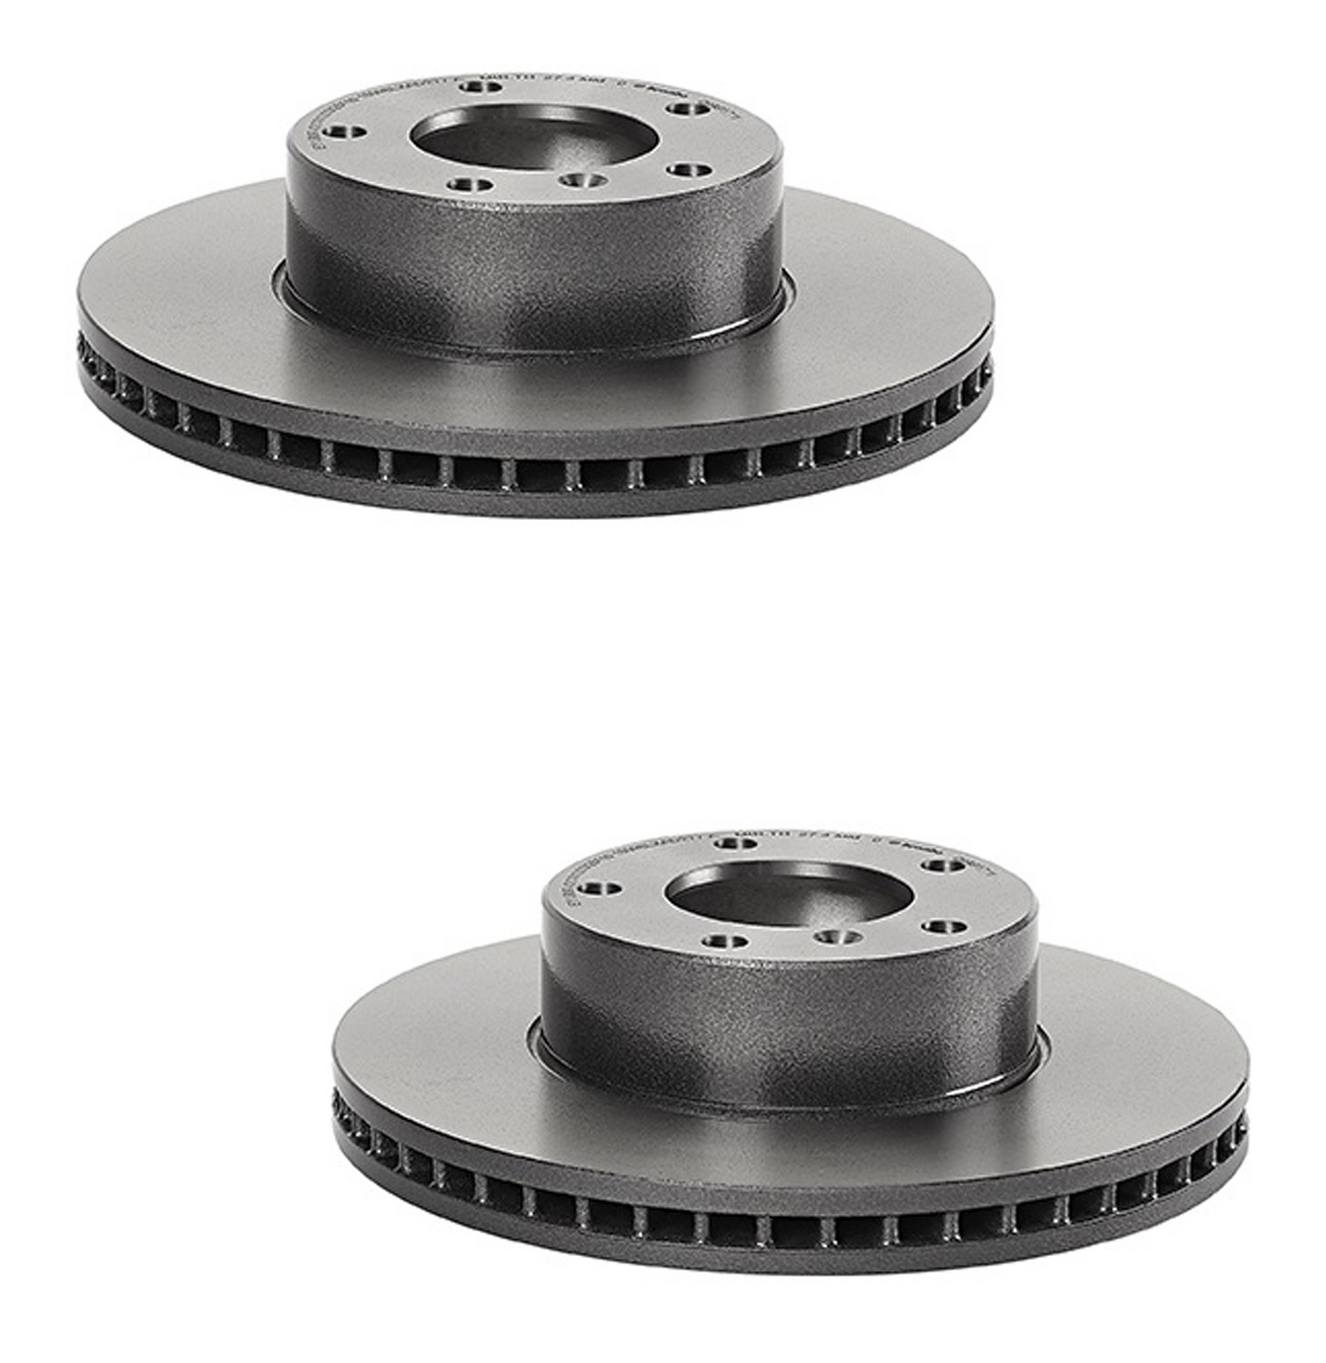 Brembo Brake Pads and Rotors Kit - Front and Rear (315mm/272mm) (Ceramic)